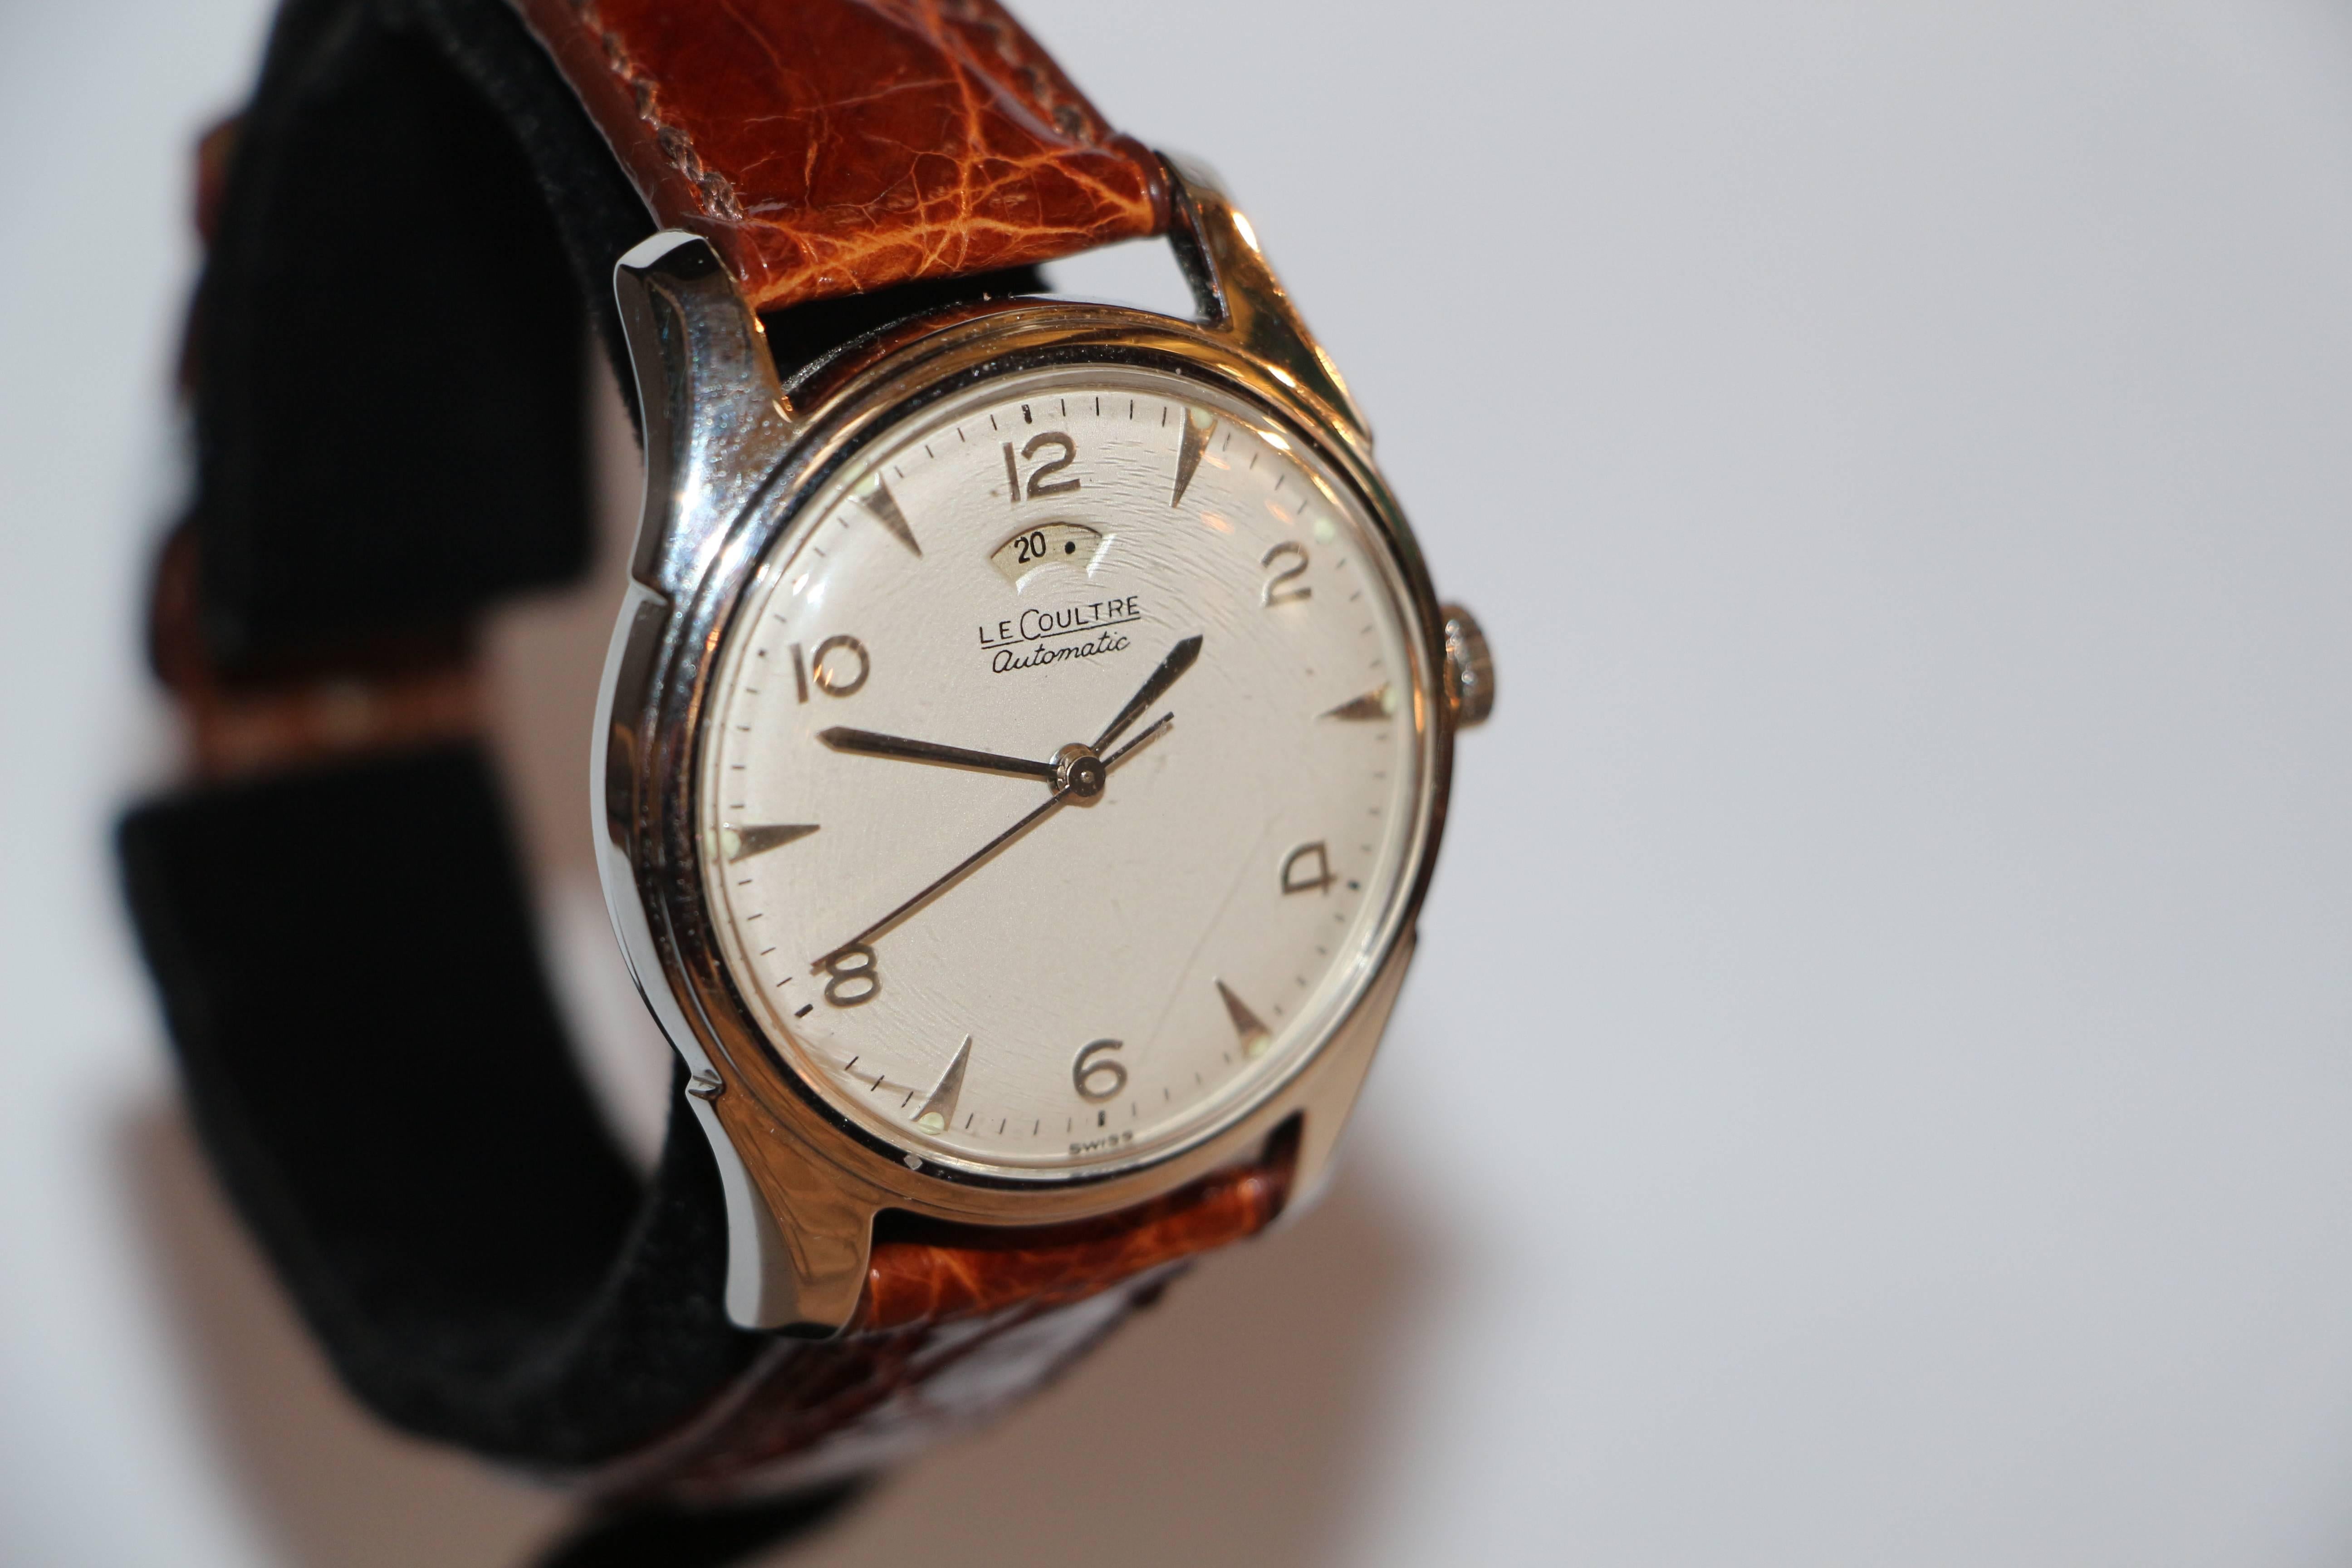 Jaeger-LeCoultre Automatic Power Reserve Watch in Stainless Steel 4